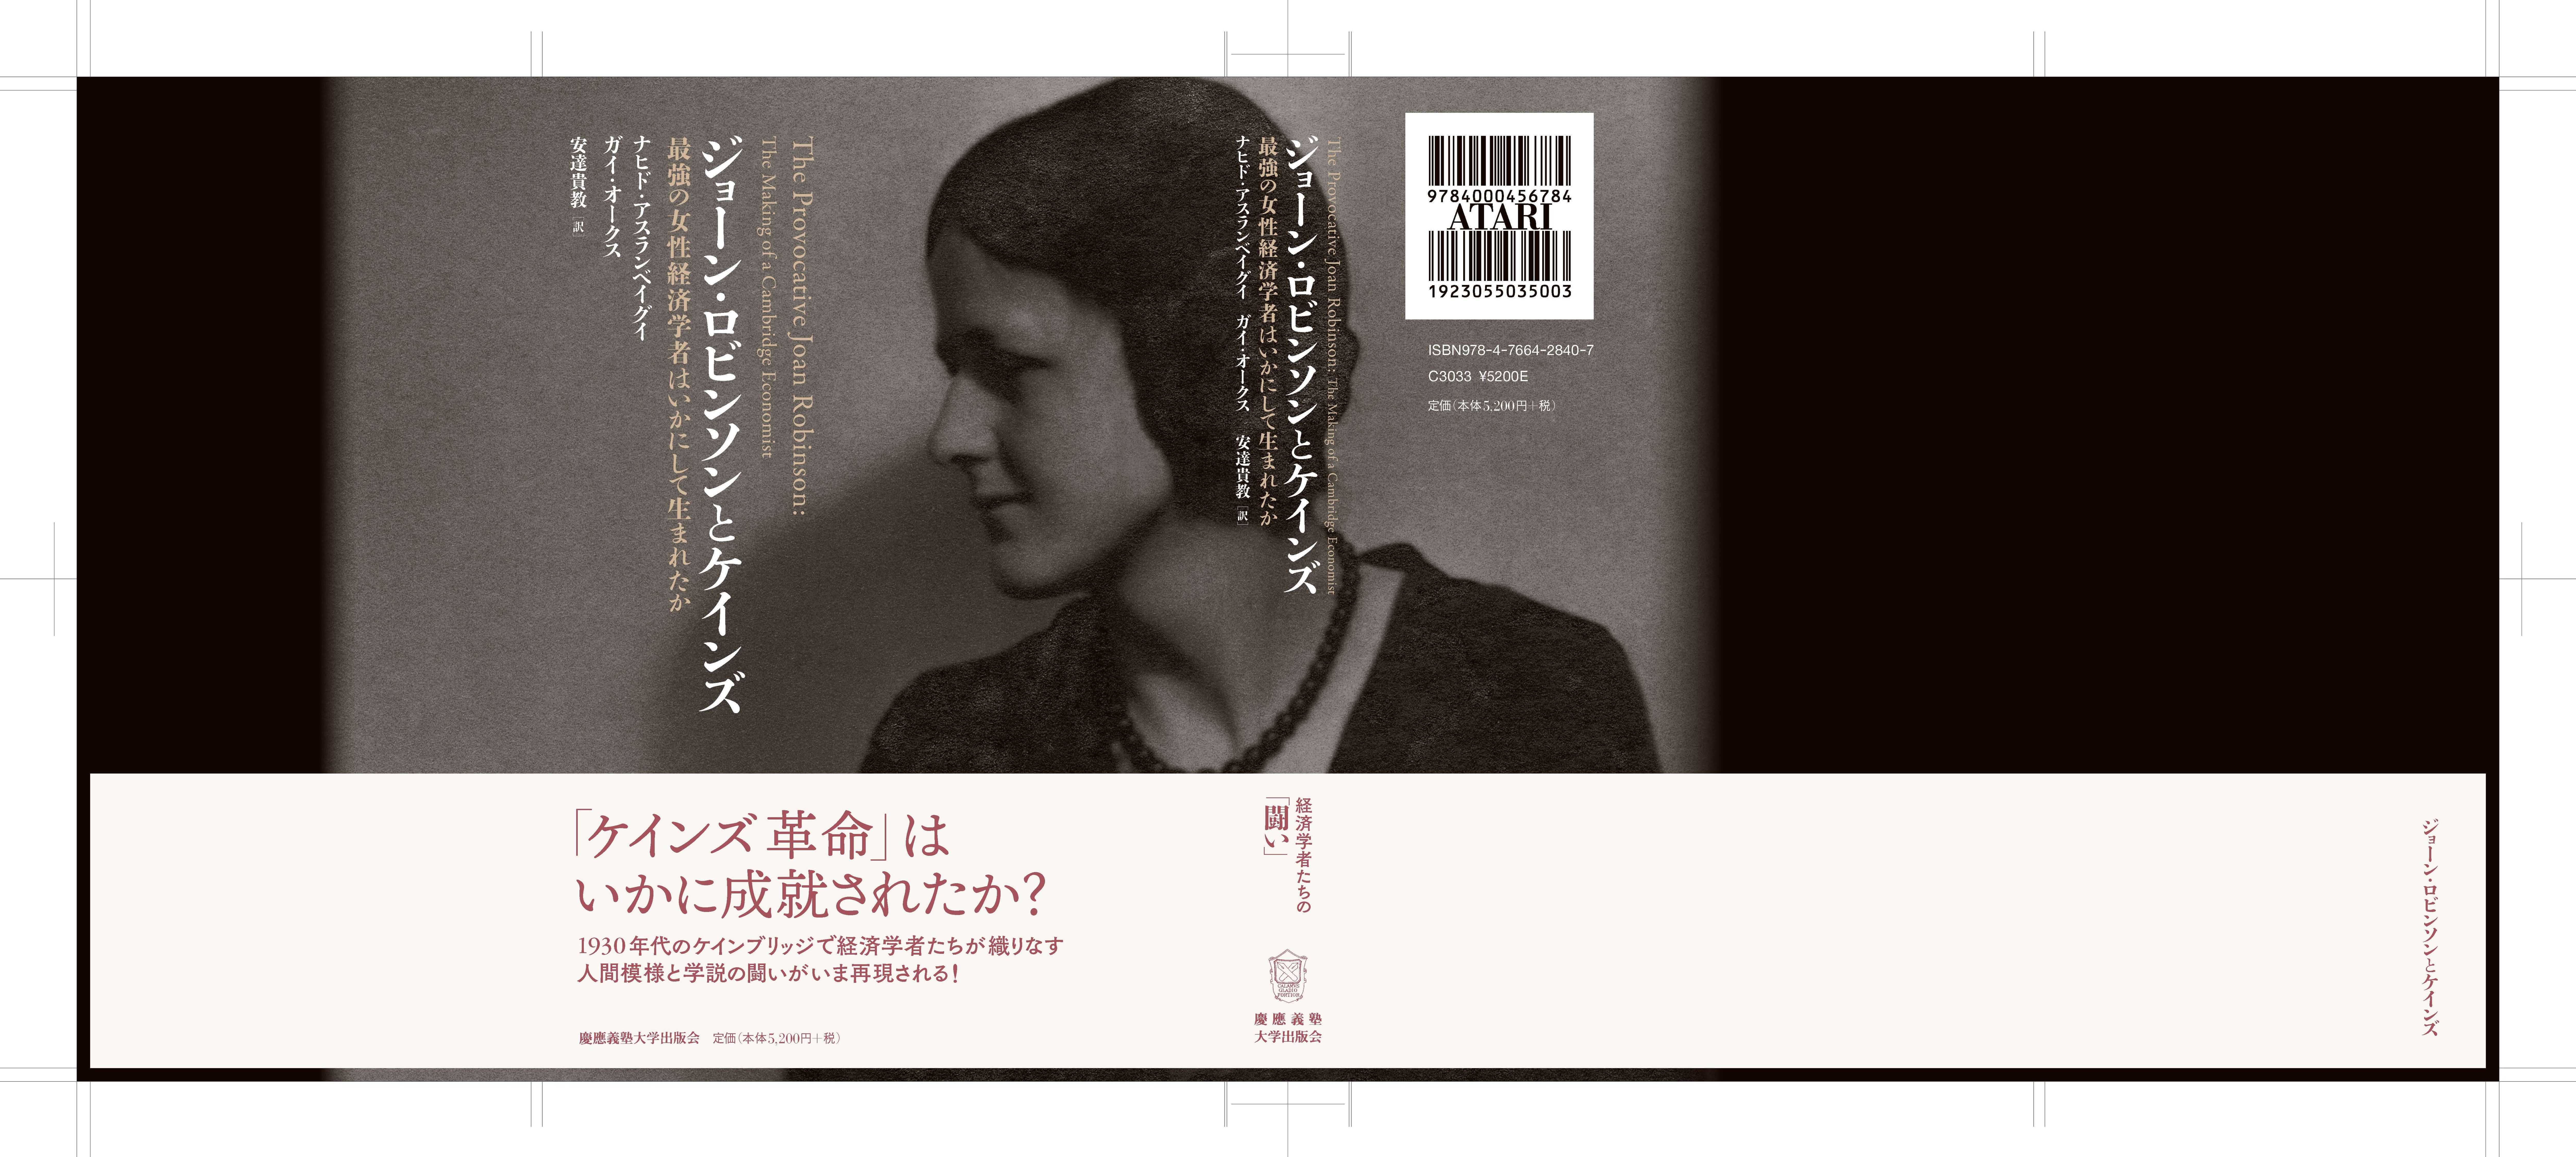 Cover of The Provocative Joan Robinson: The Making of Cambridge Economist in Japanese